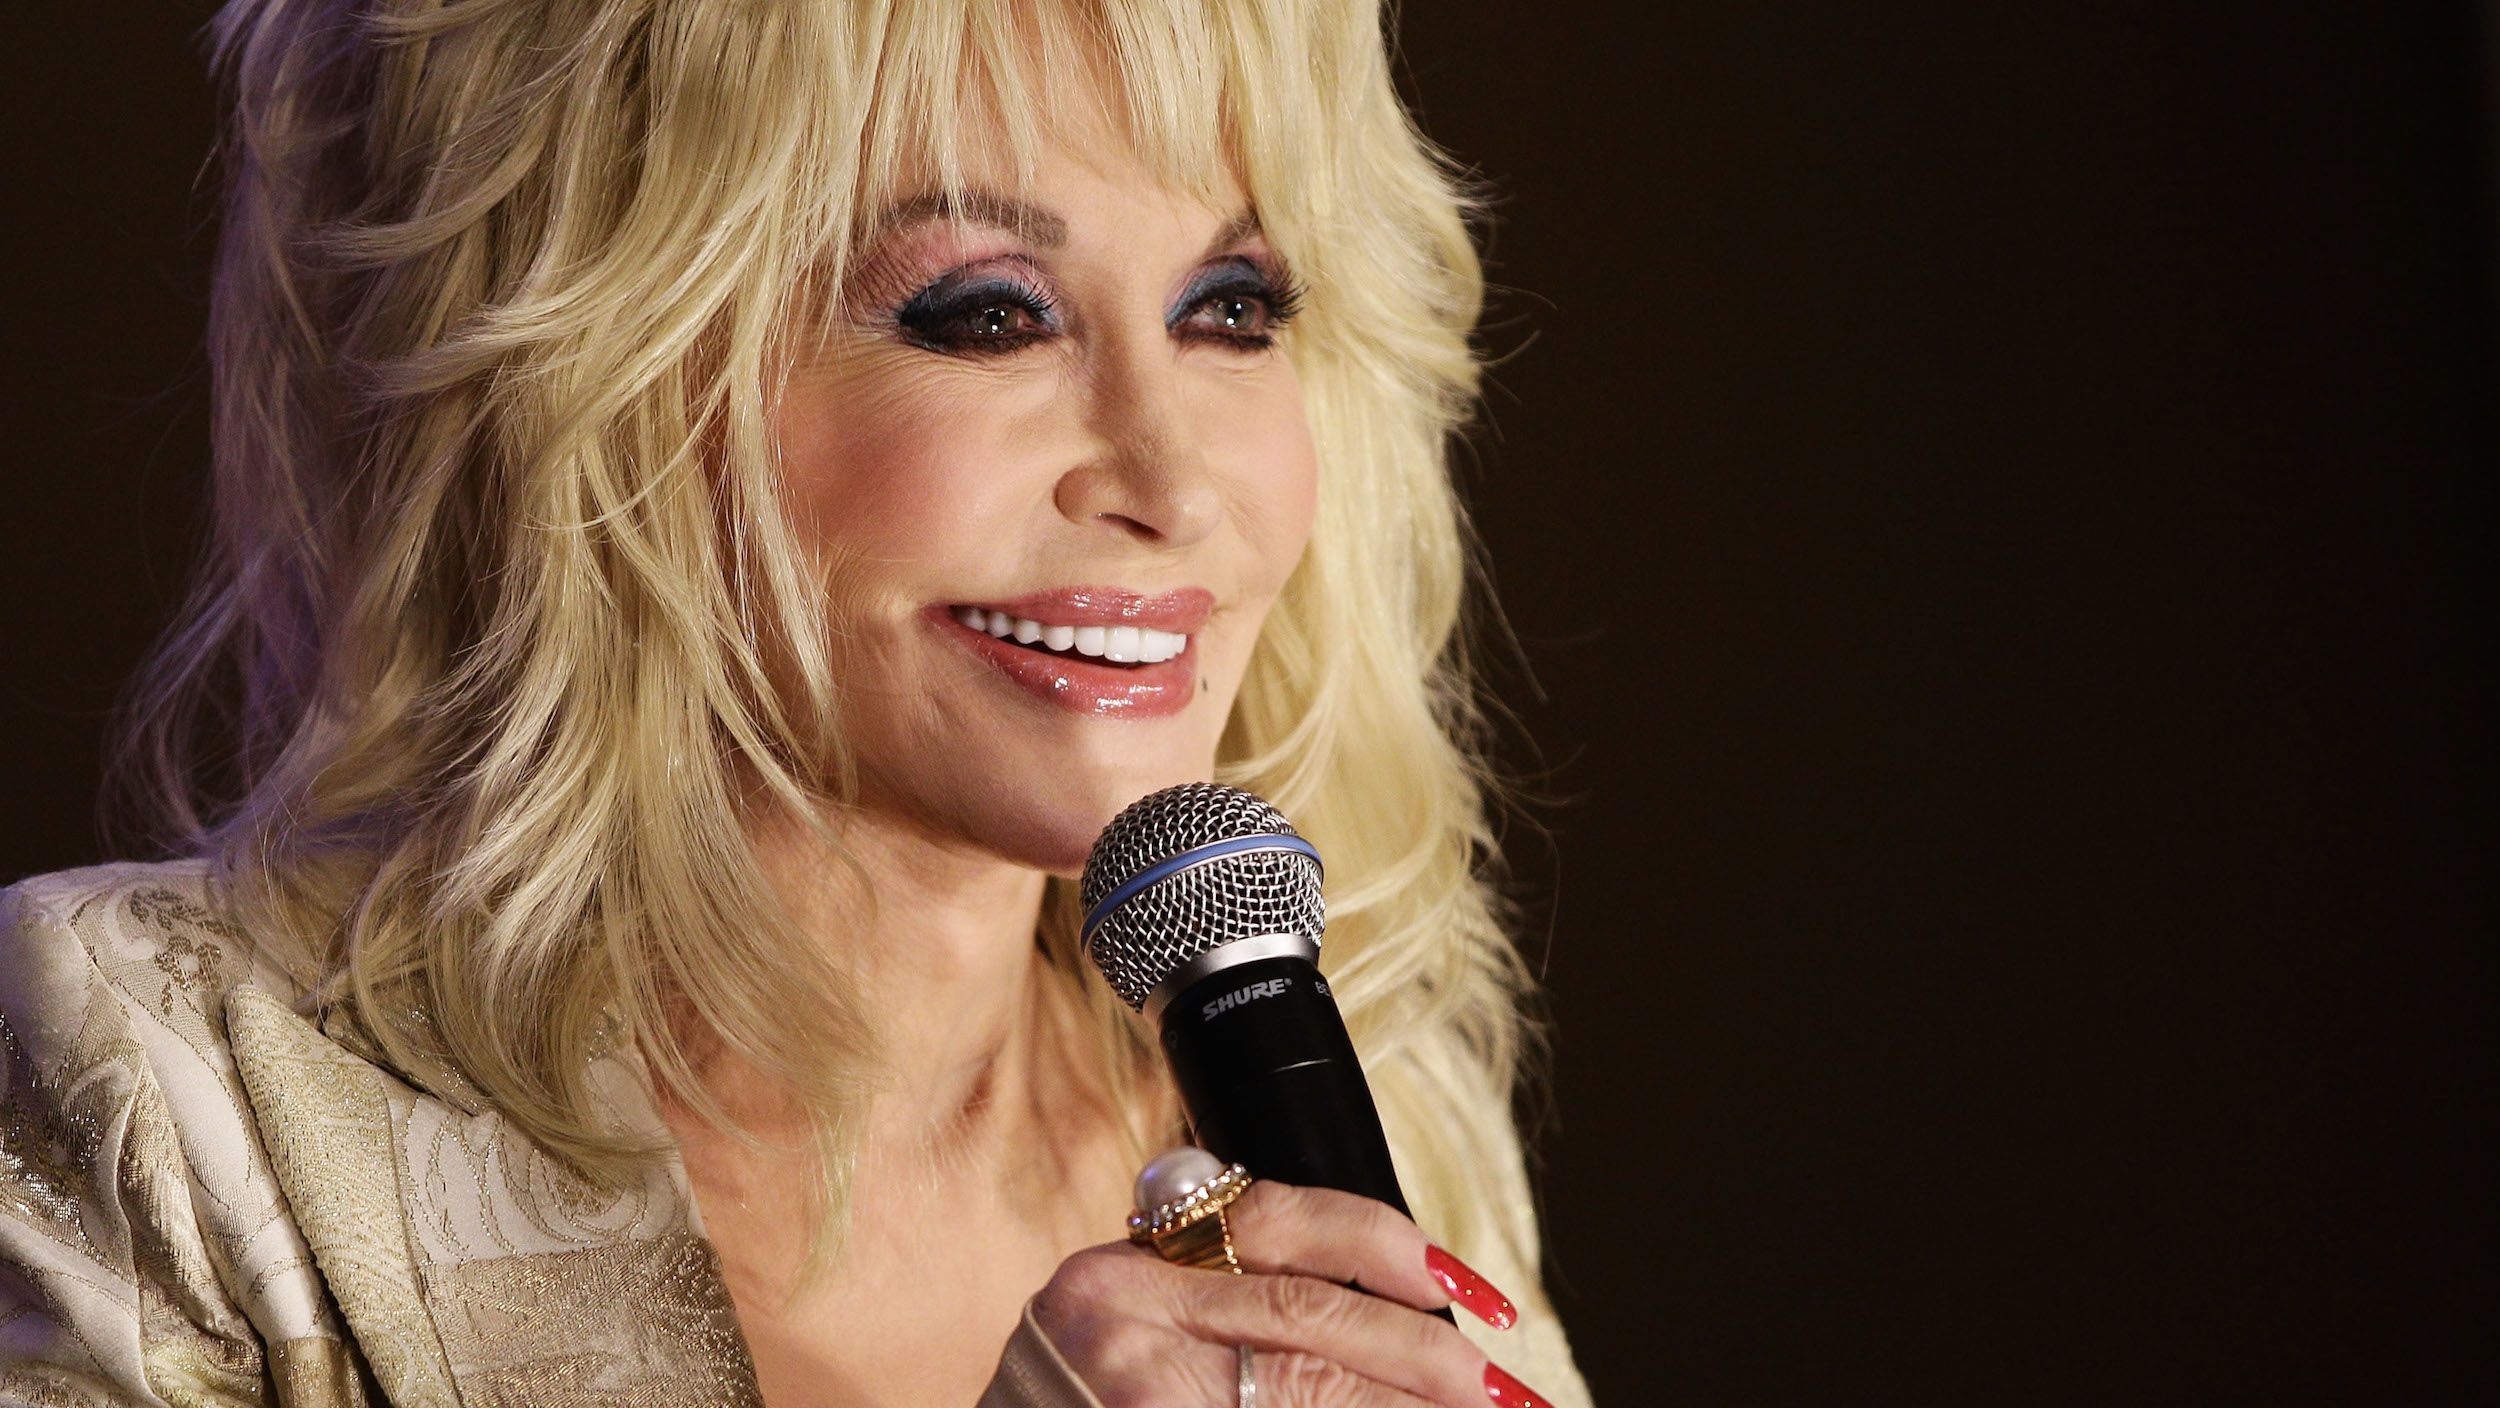 Alien Cut Dick - 11 Things You Didn't Know About Dolly Parton | Mental Floss